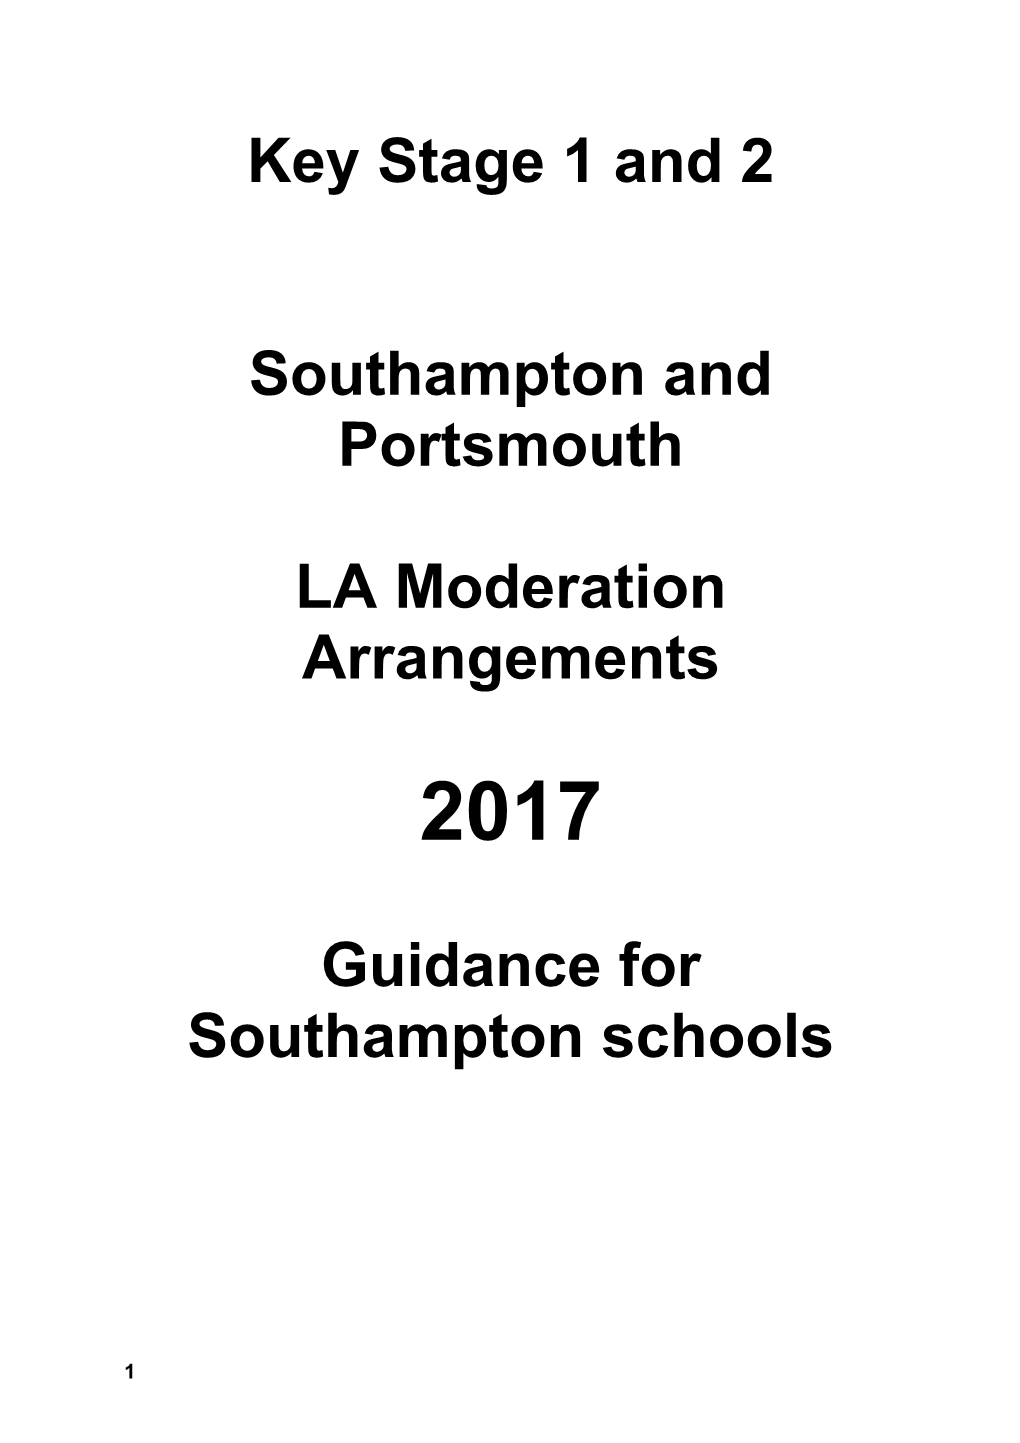 Key Stage 1 and 2 - Southampton and Portsmouth LA Moderation Arrangements - 2017